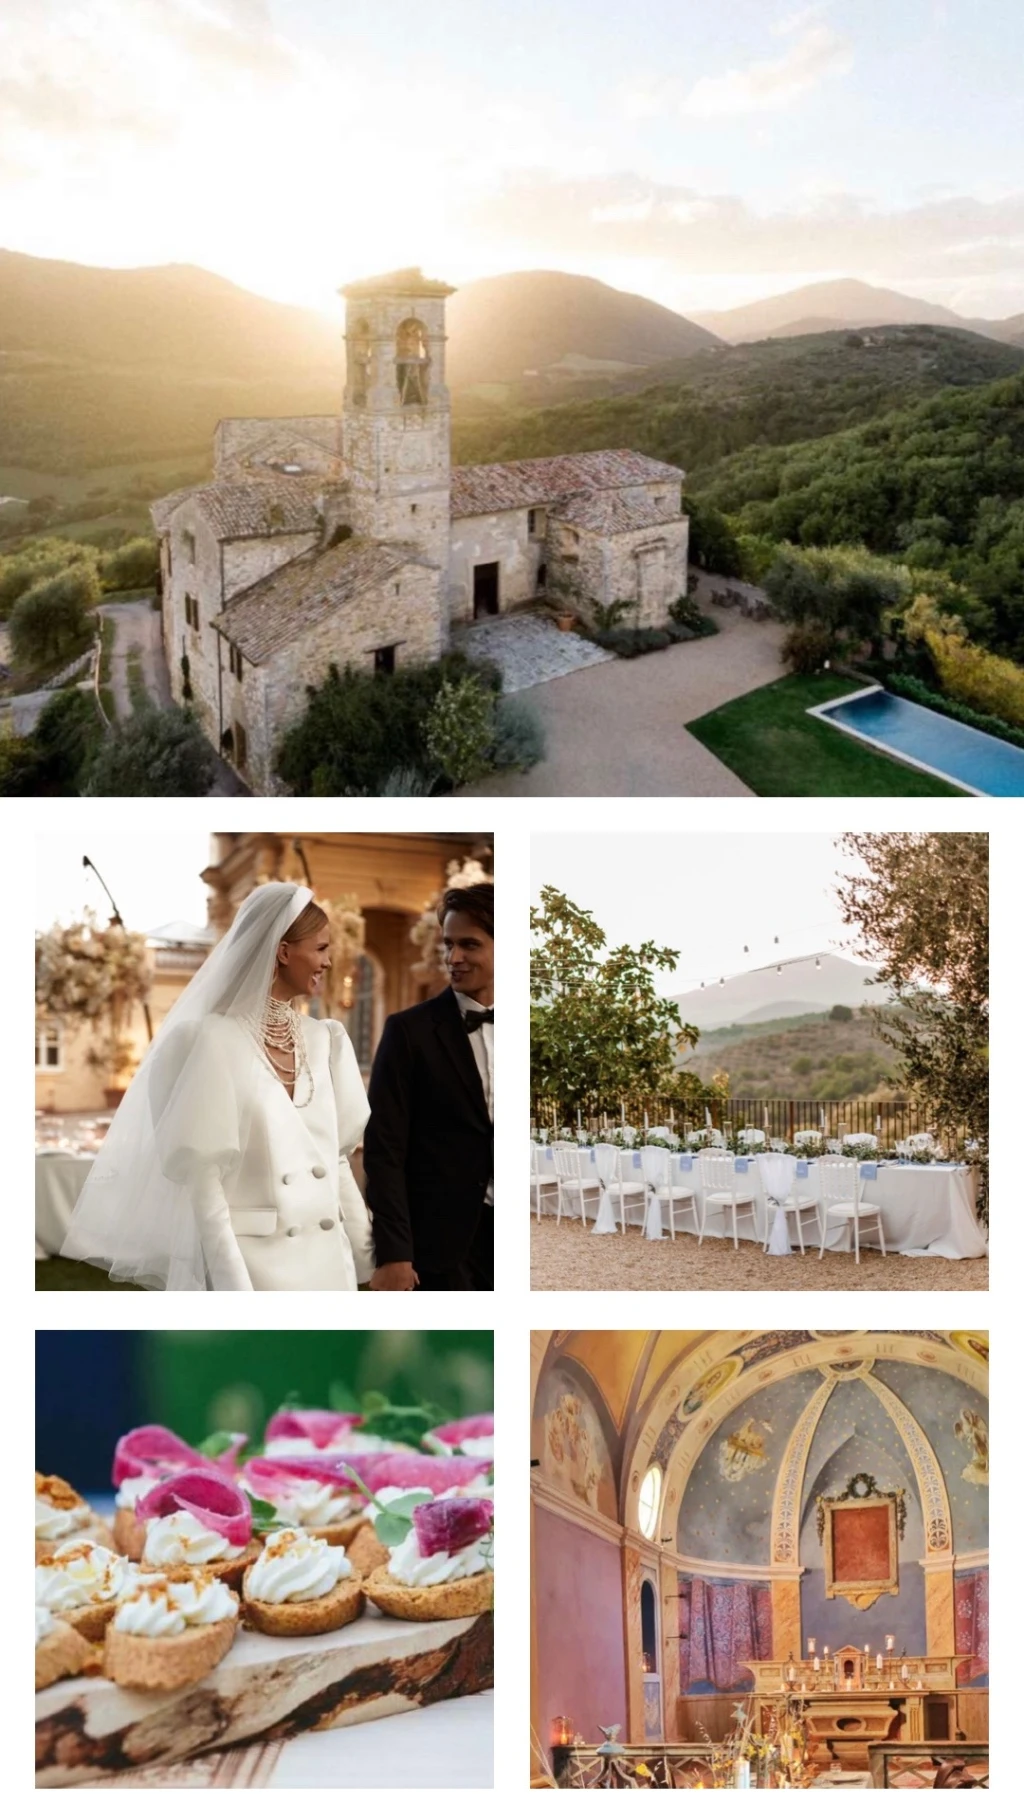 Destination wedding, Umbria, Italy. Chic, Exclusive and 5-star luxury